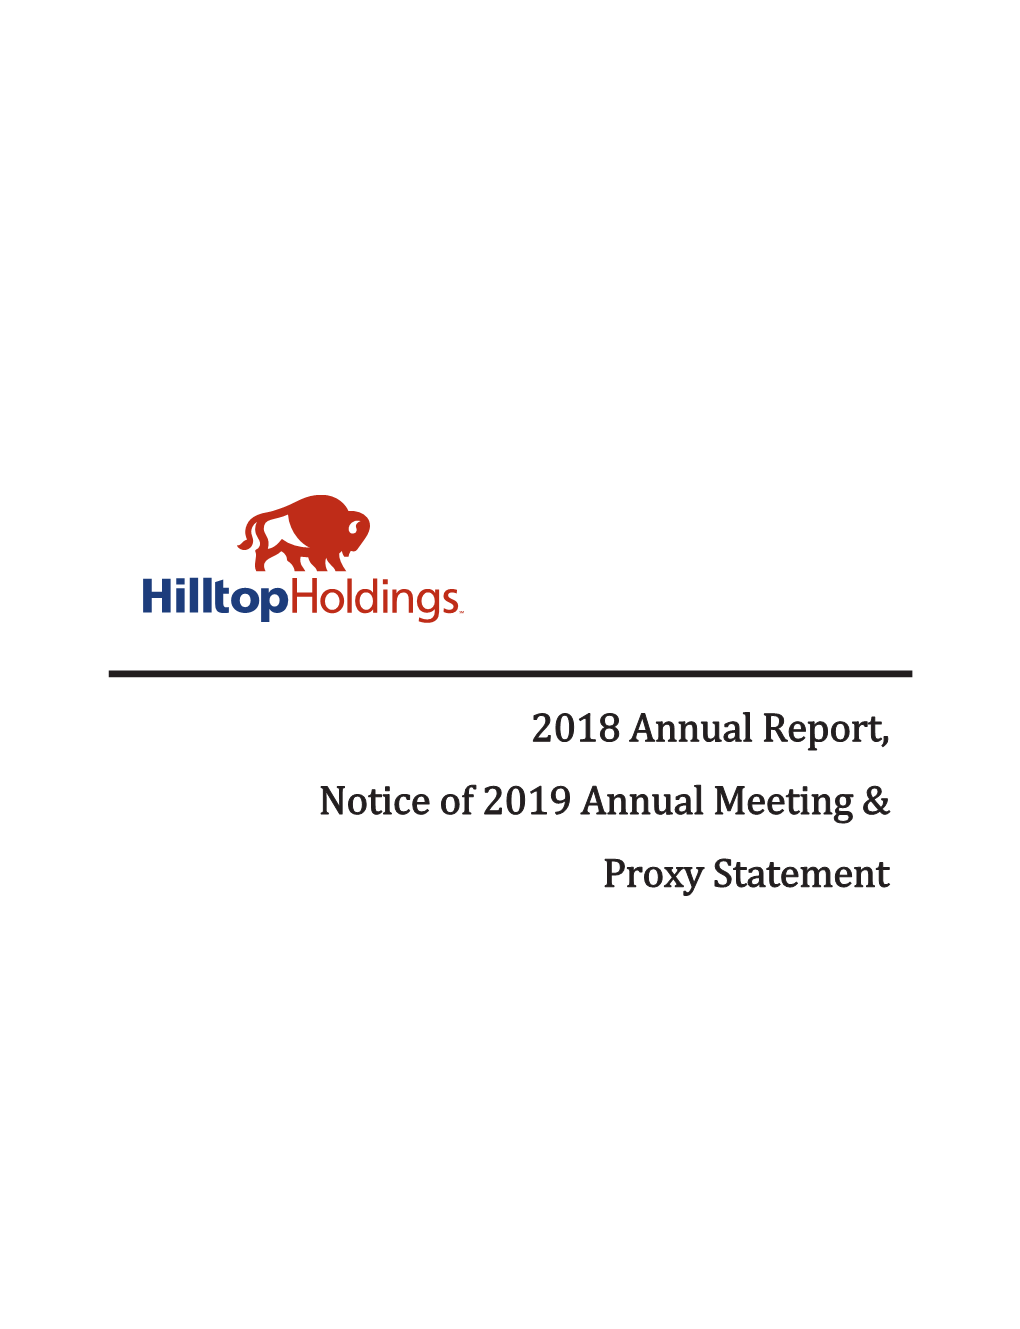 2018 Annual Report, Notice of 2019 Annual Meeting & Proxy Statement